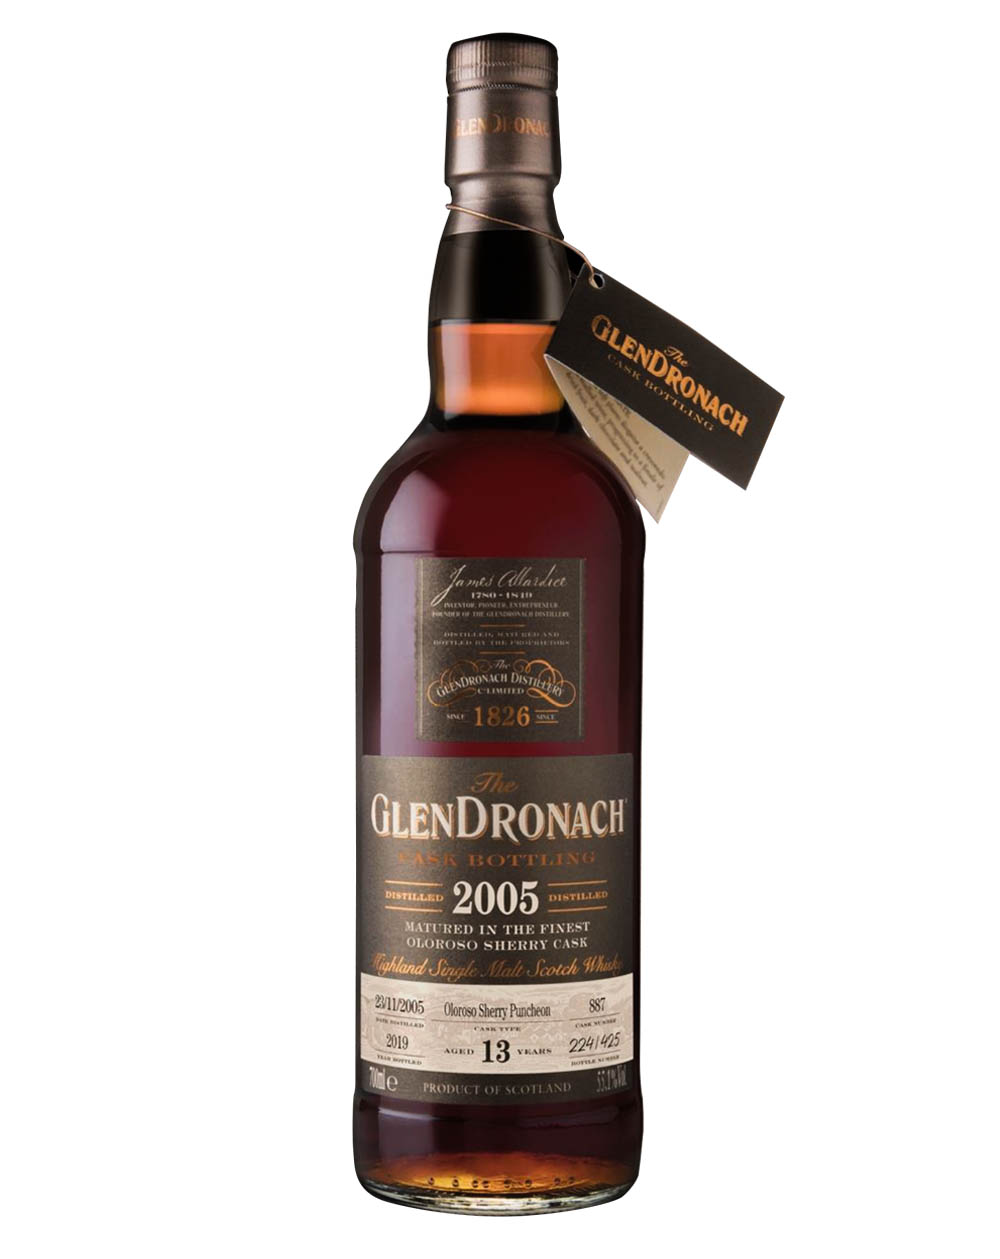 Glendronach 2005 Single Cask #887 (13 Years Old) Musthave Malts MHM